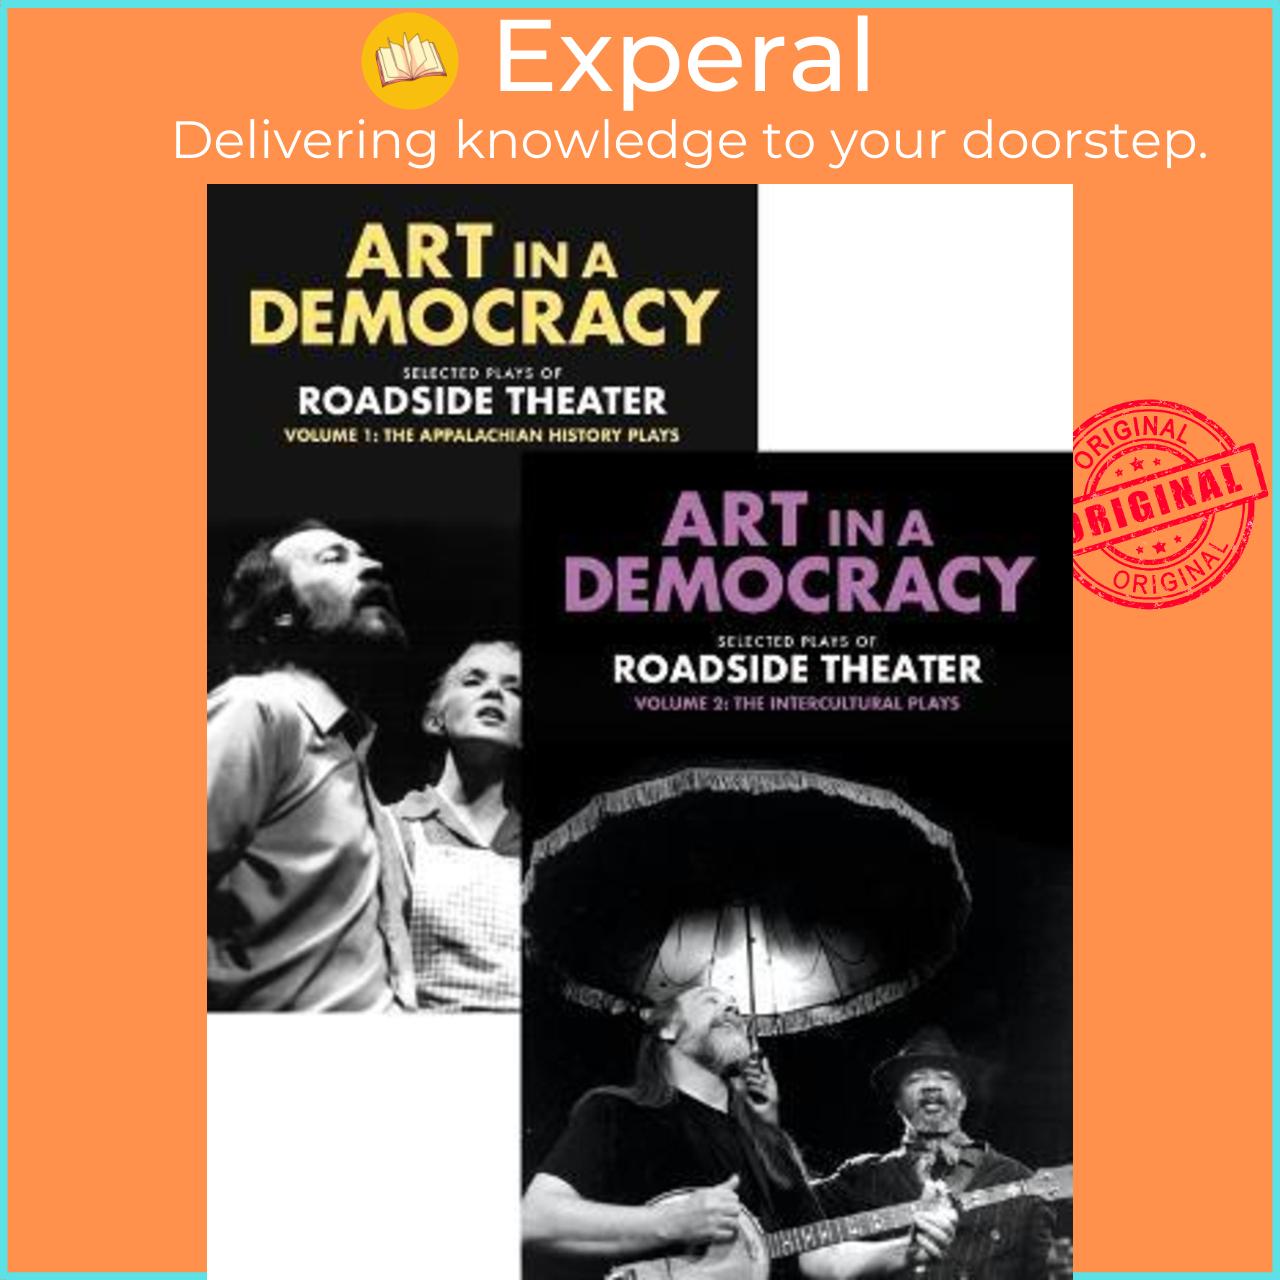 Sách - Art in a Democracy : Selected Plays of Roadside Theater, Vol 1 & Vol 2 by Ben Fink (US edition, paperback)